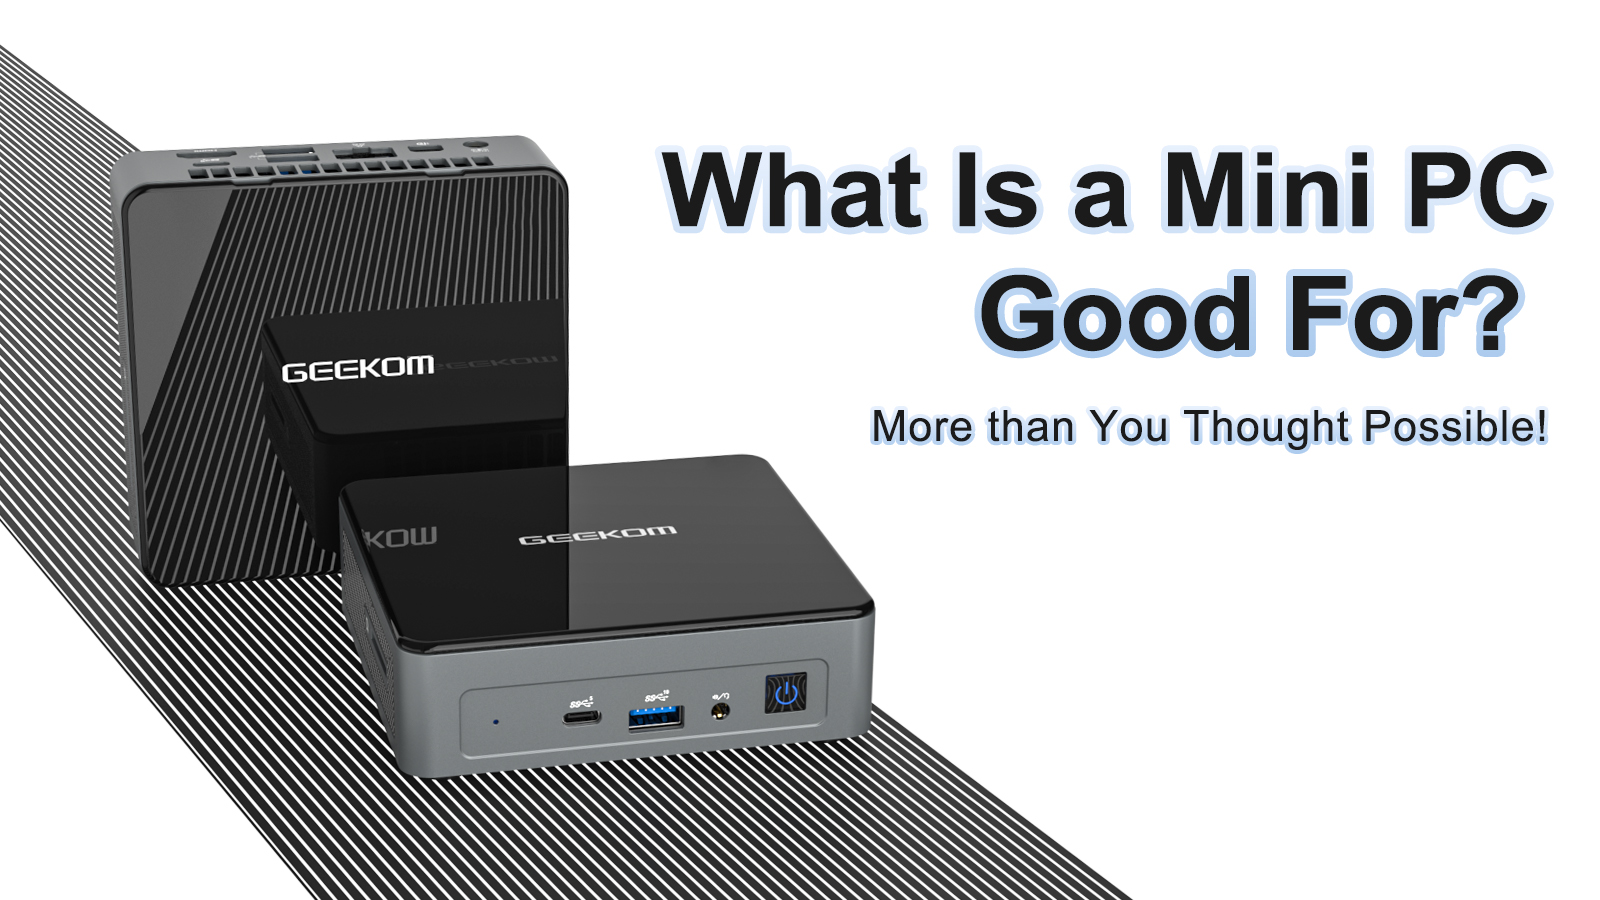 insekt udvikle stak What Is a Mini PC Good For? More than You Thought Possible! - GEEKOM